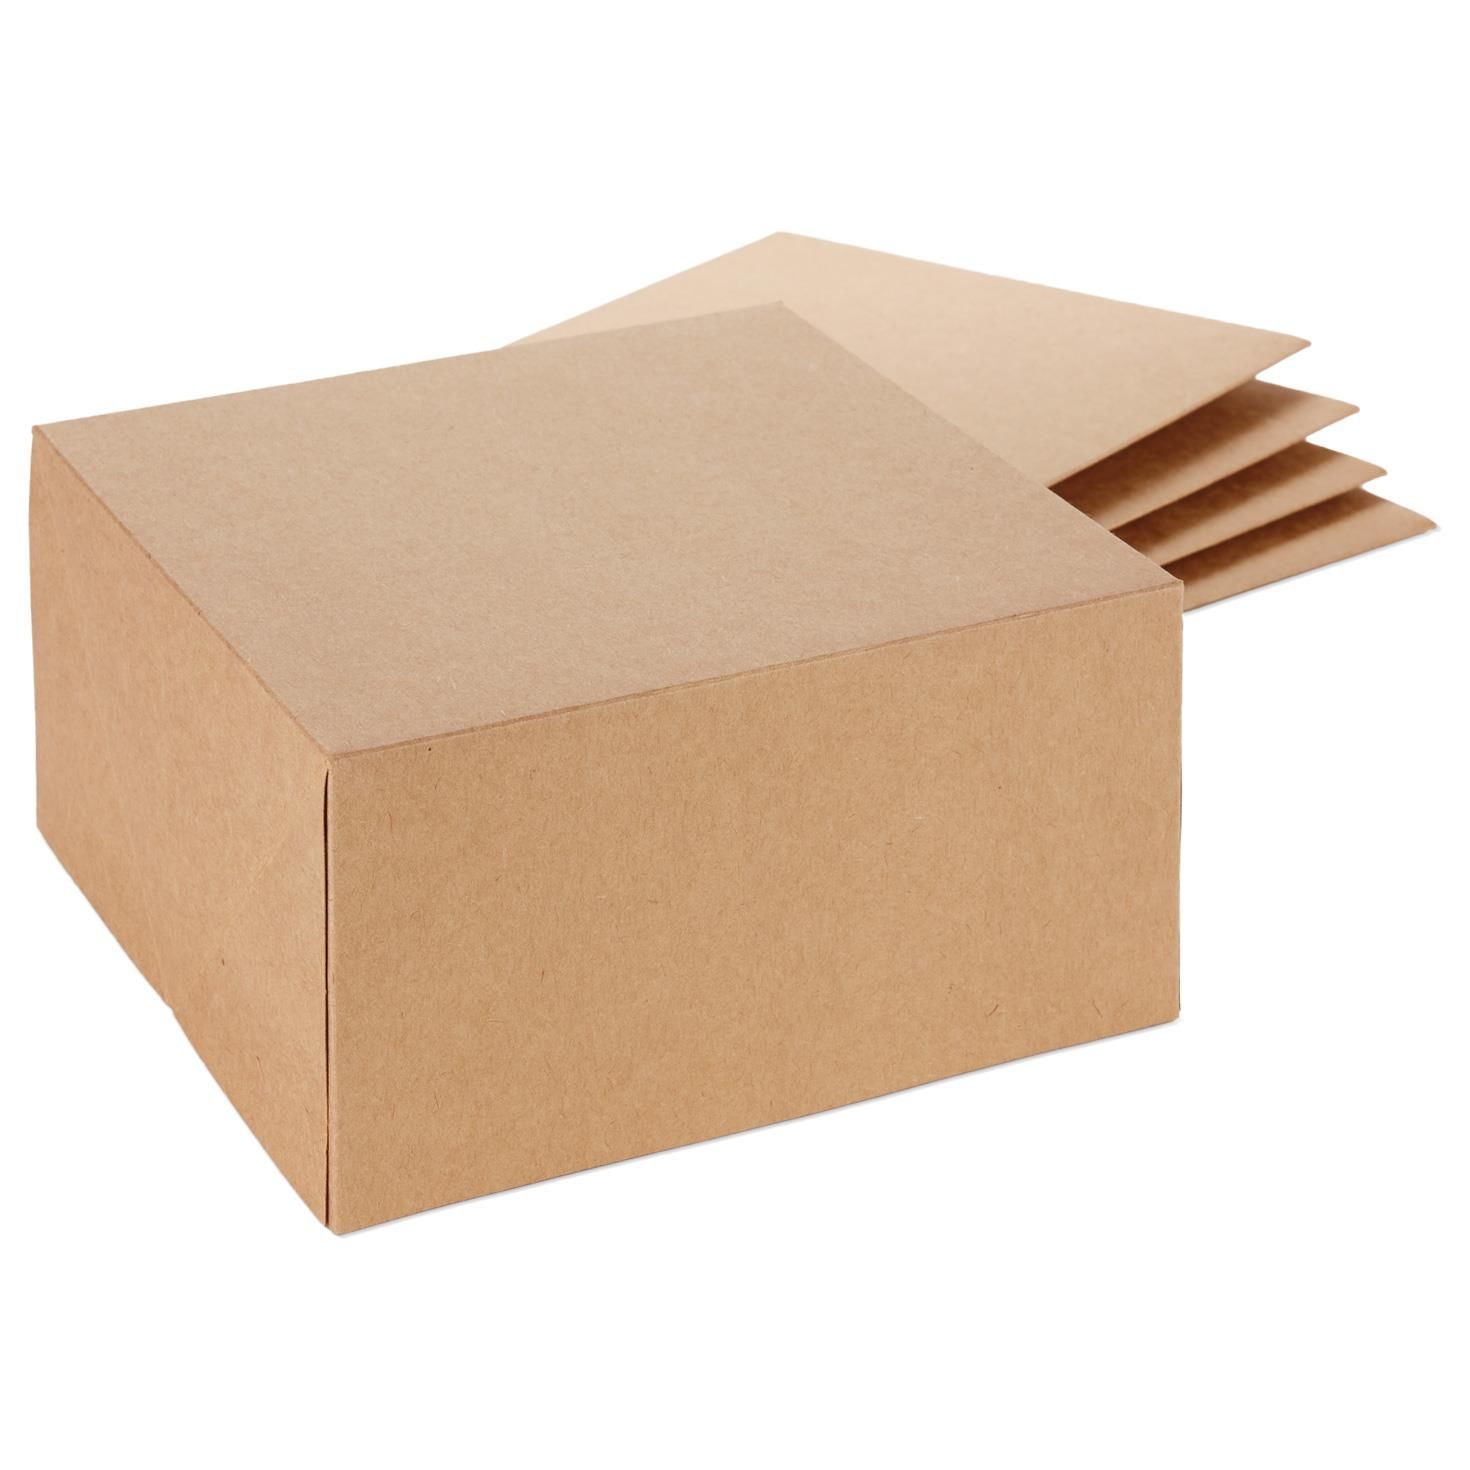 Kraft Square Gift Boxes, Pack of 5 - Gift Boxes - Hallmark